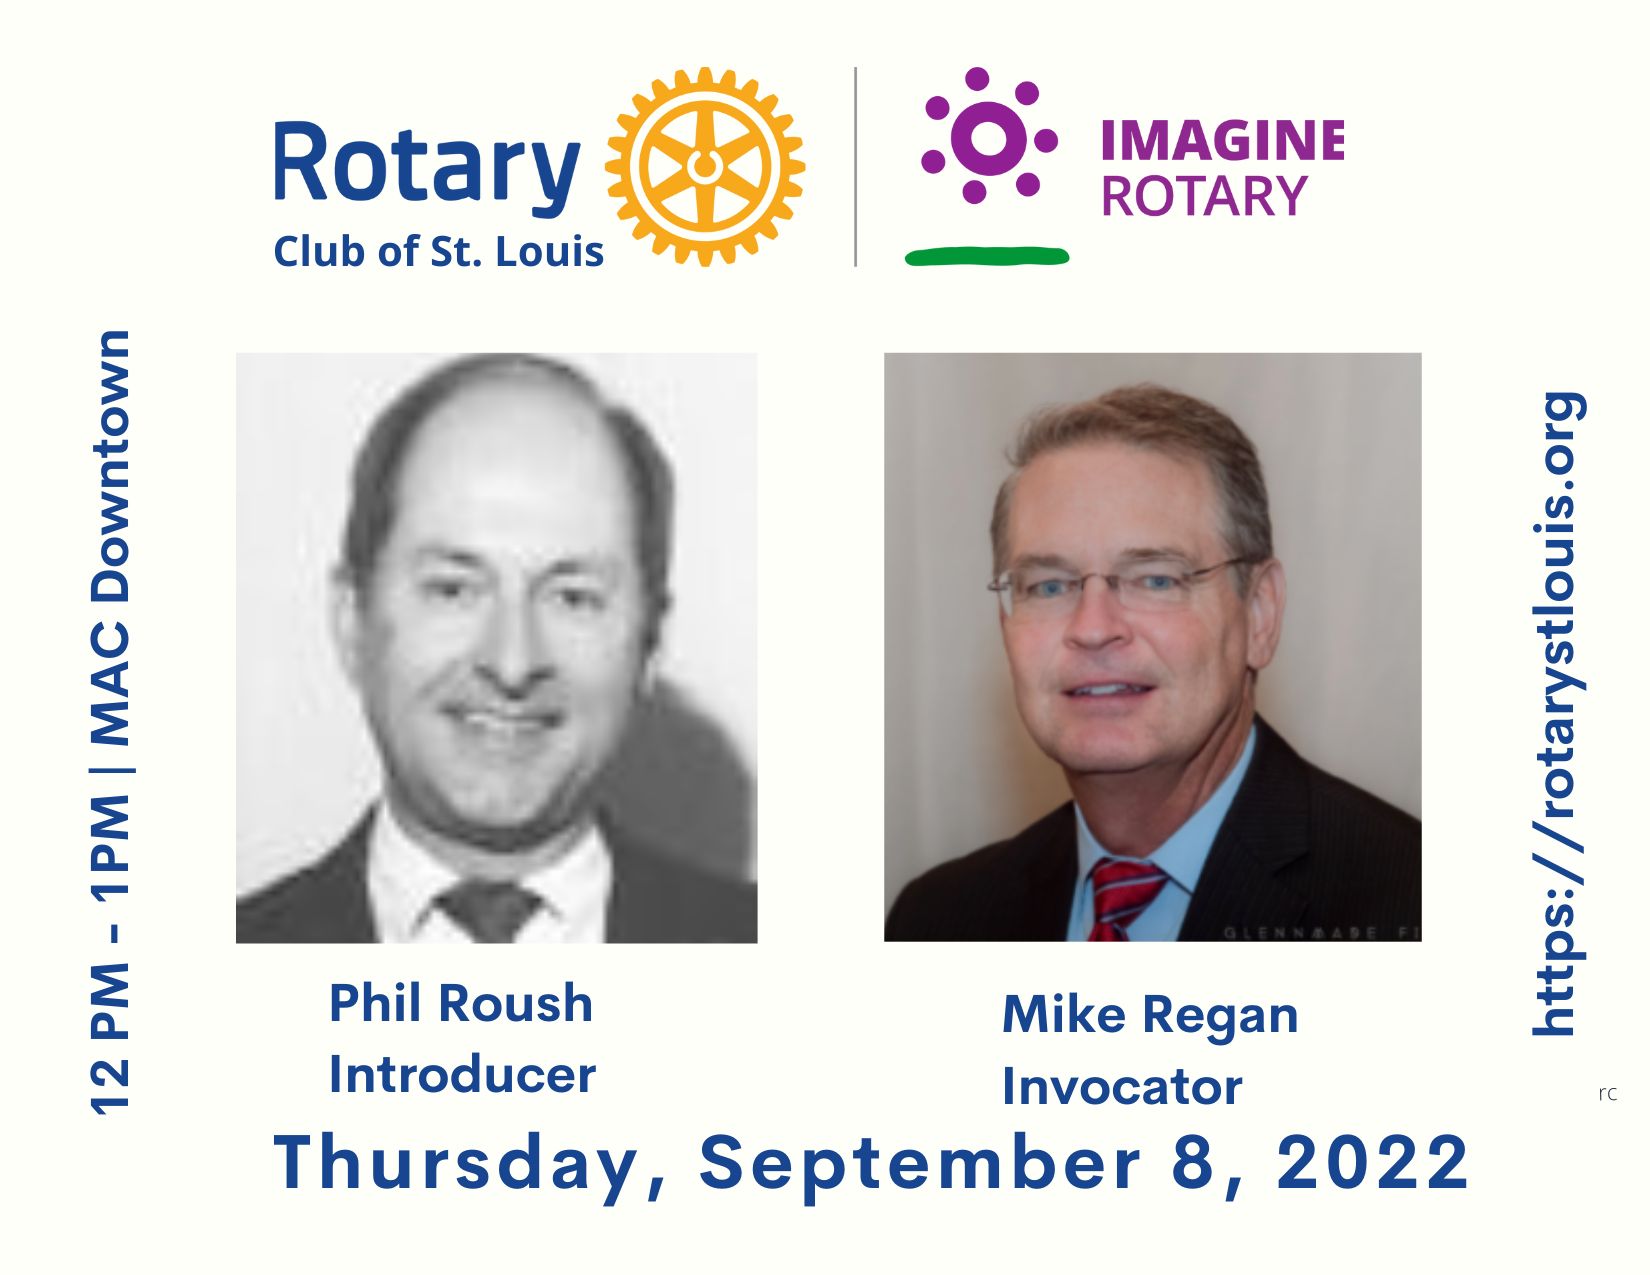 Phil Roush, Introducer & MIke Regan, Invocator 9-8-22 at St. Louis Rotary Club